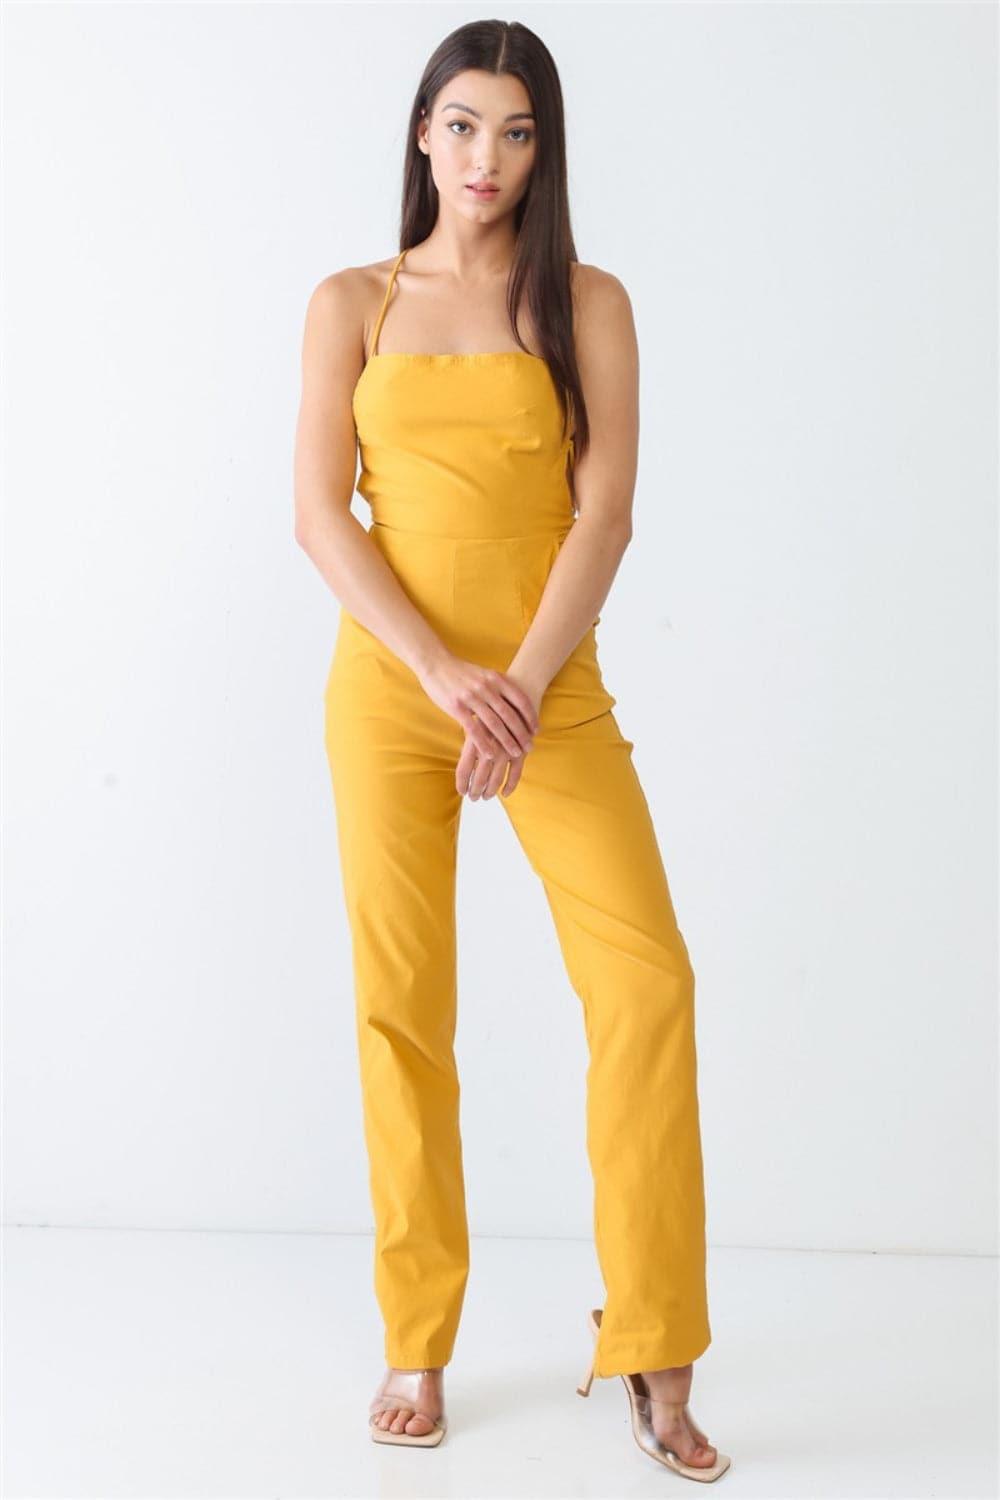 Backless Tied Spaghetti Strap Sleeveless Jumpsuit - SwagglyLife Home & Fashion